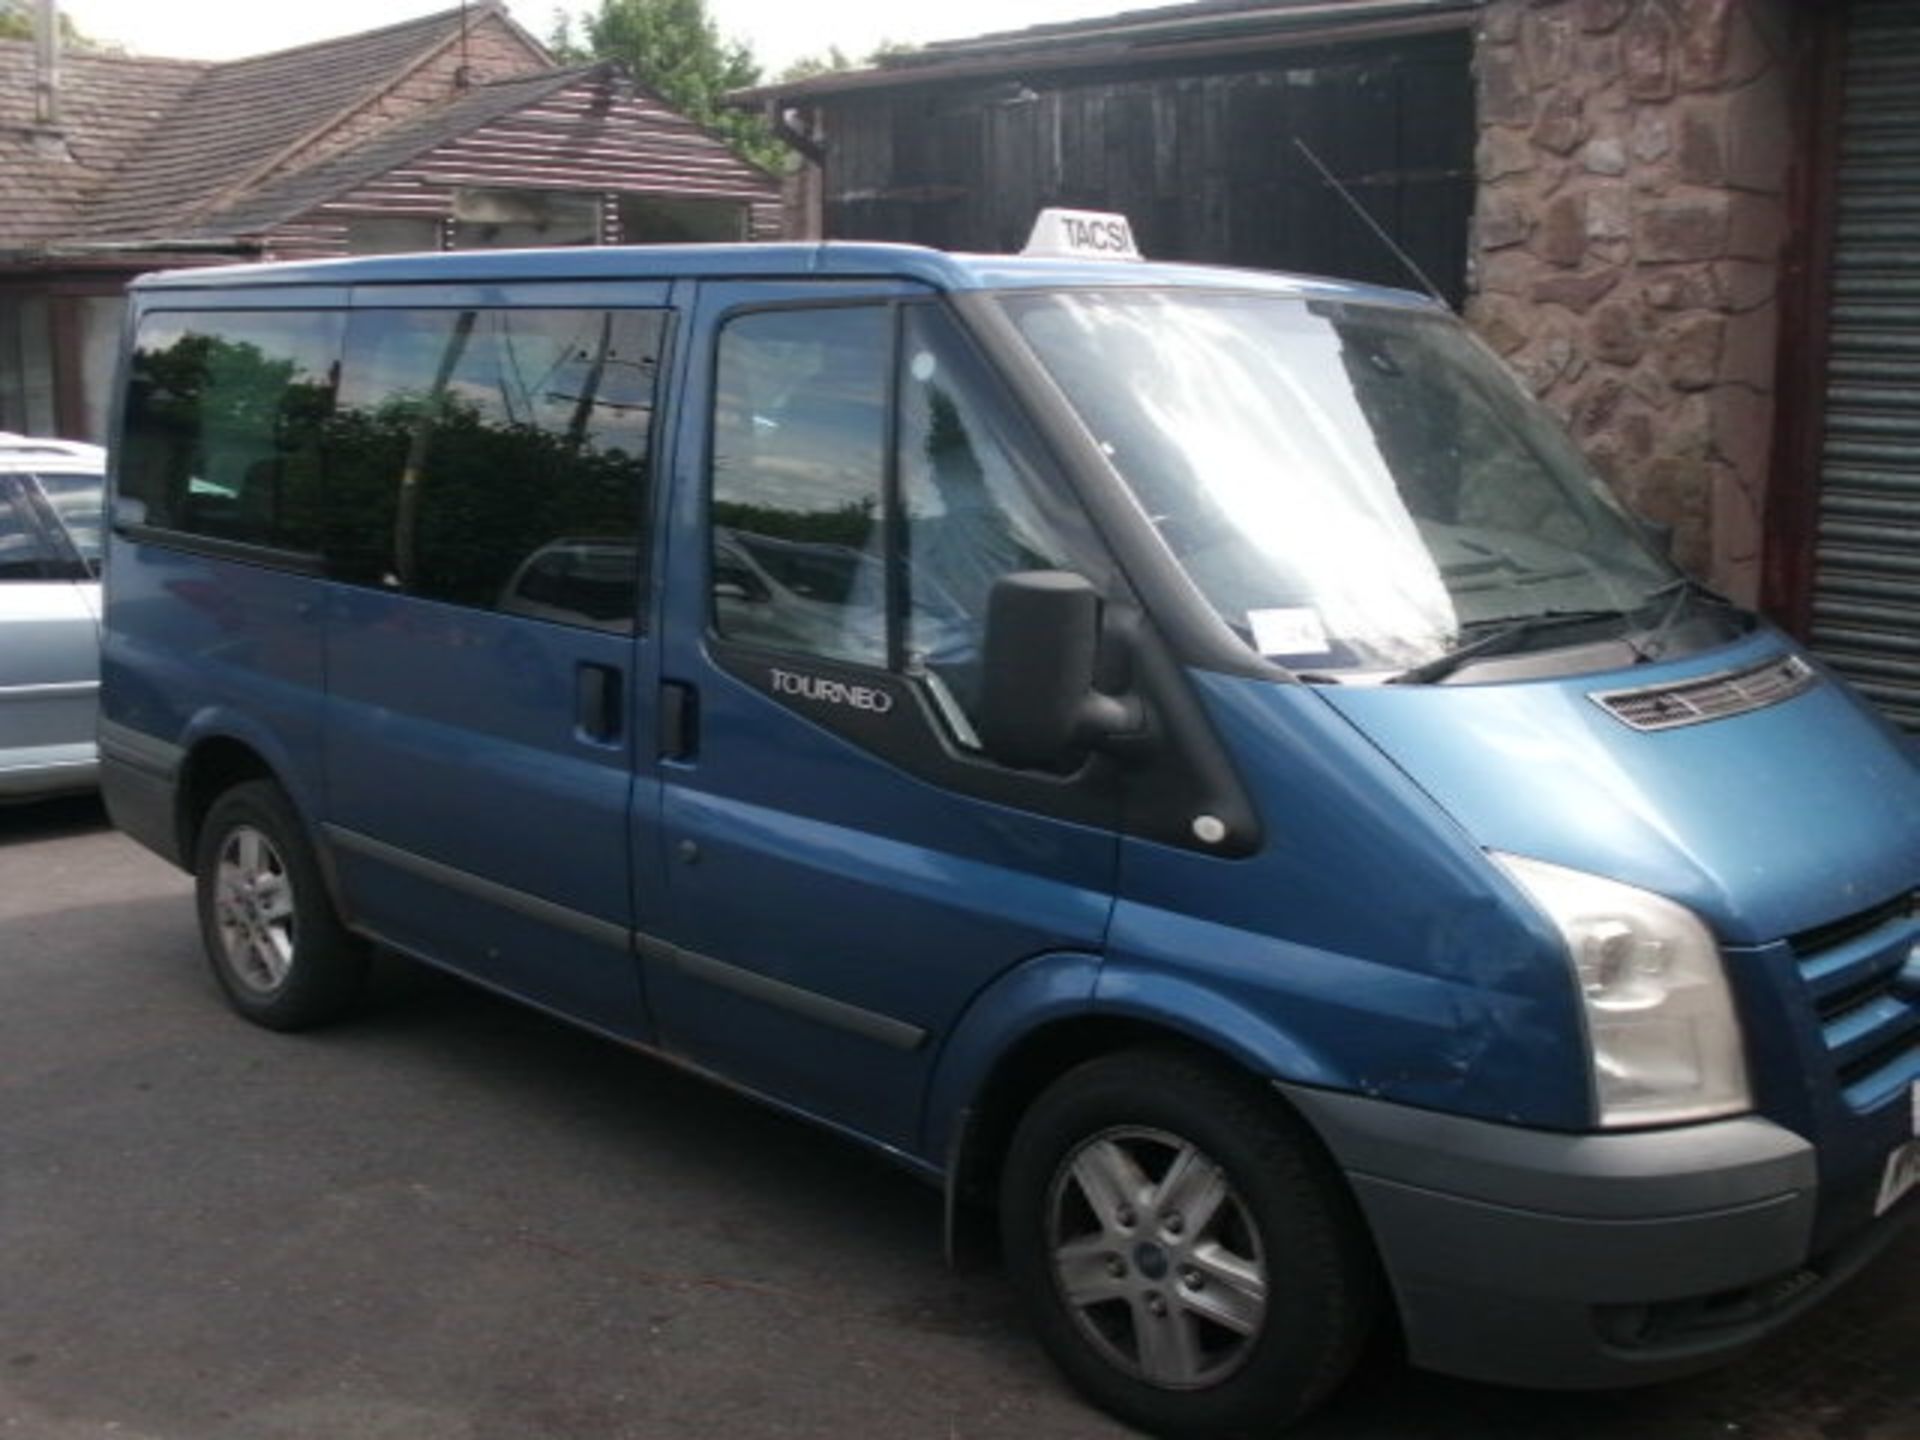 2008 (Nov) FORD TRANSIT 110 T330M FWD 8 seater MINI BUS including driver, blue, diesel, 2198cc, - Image 2 of 4